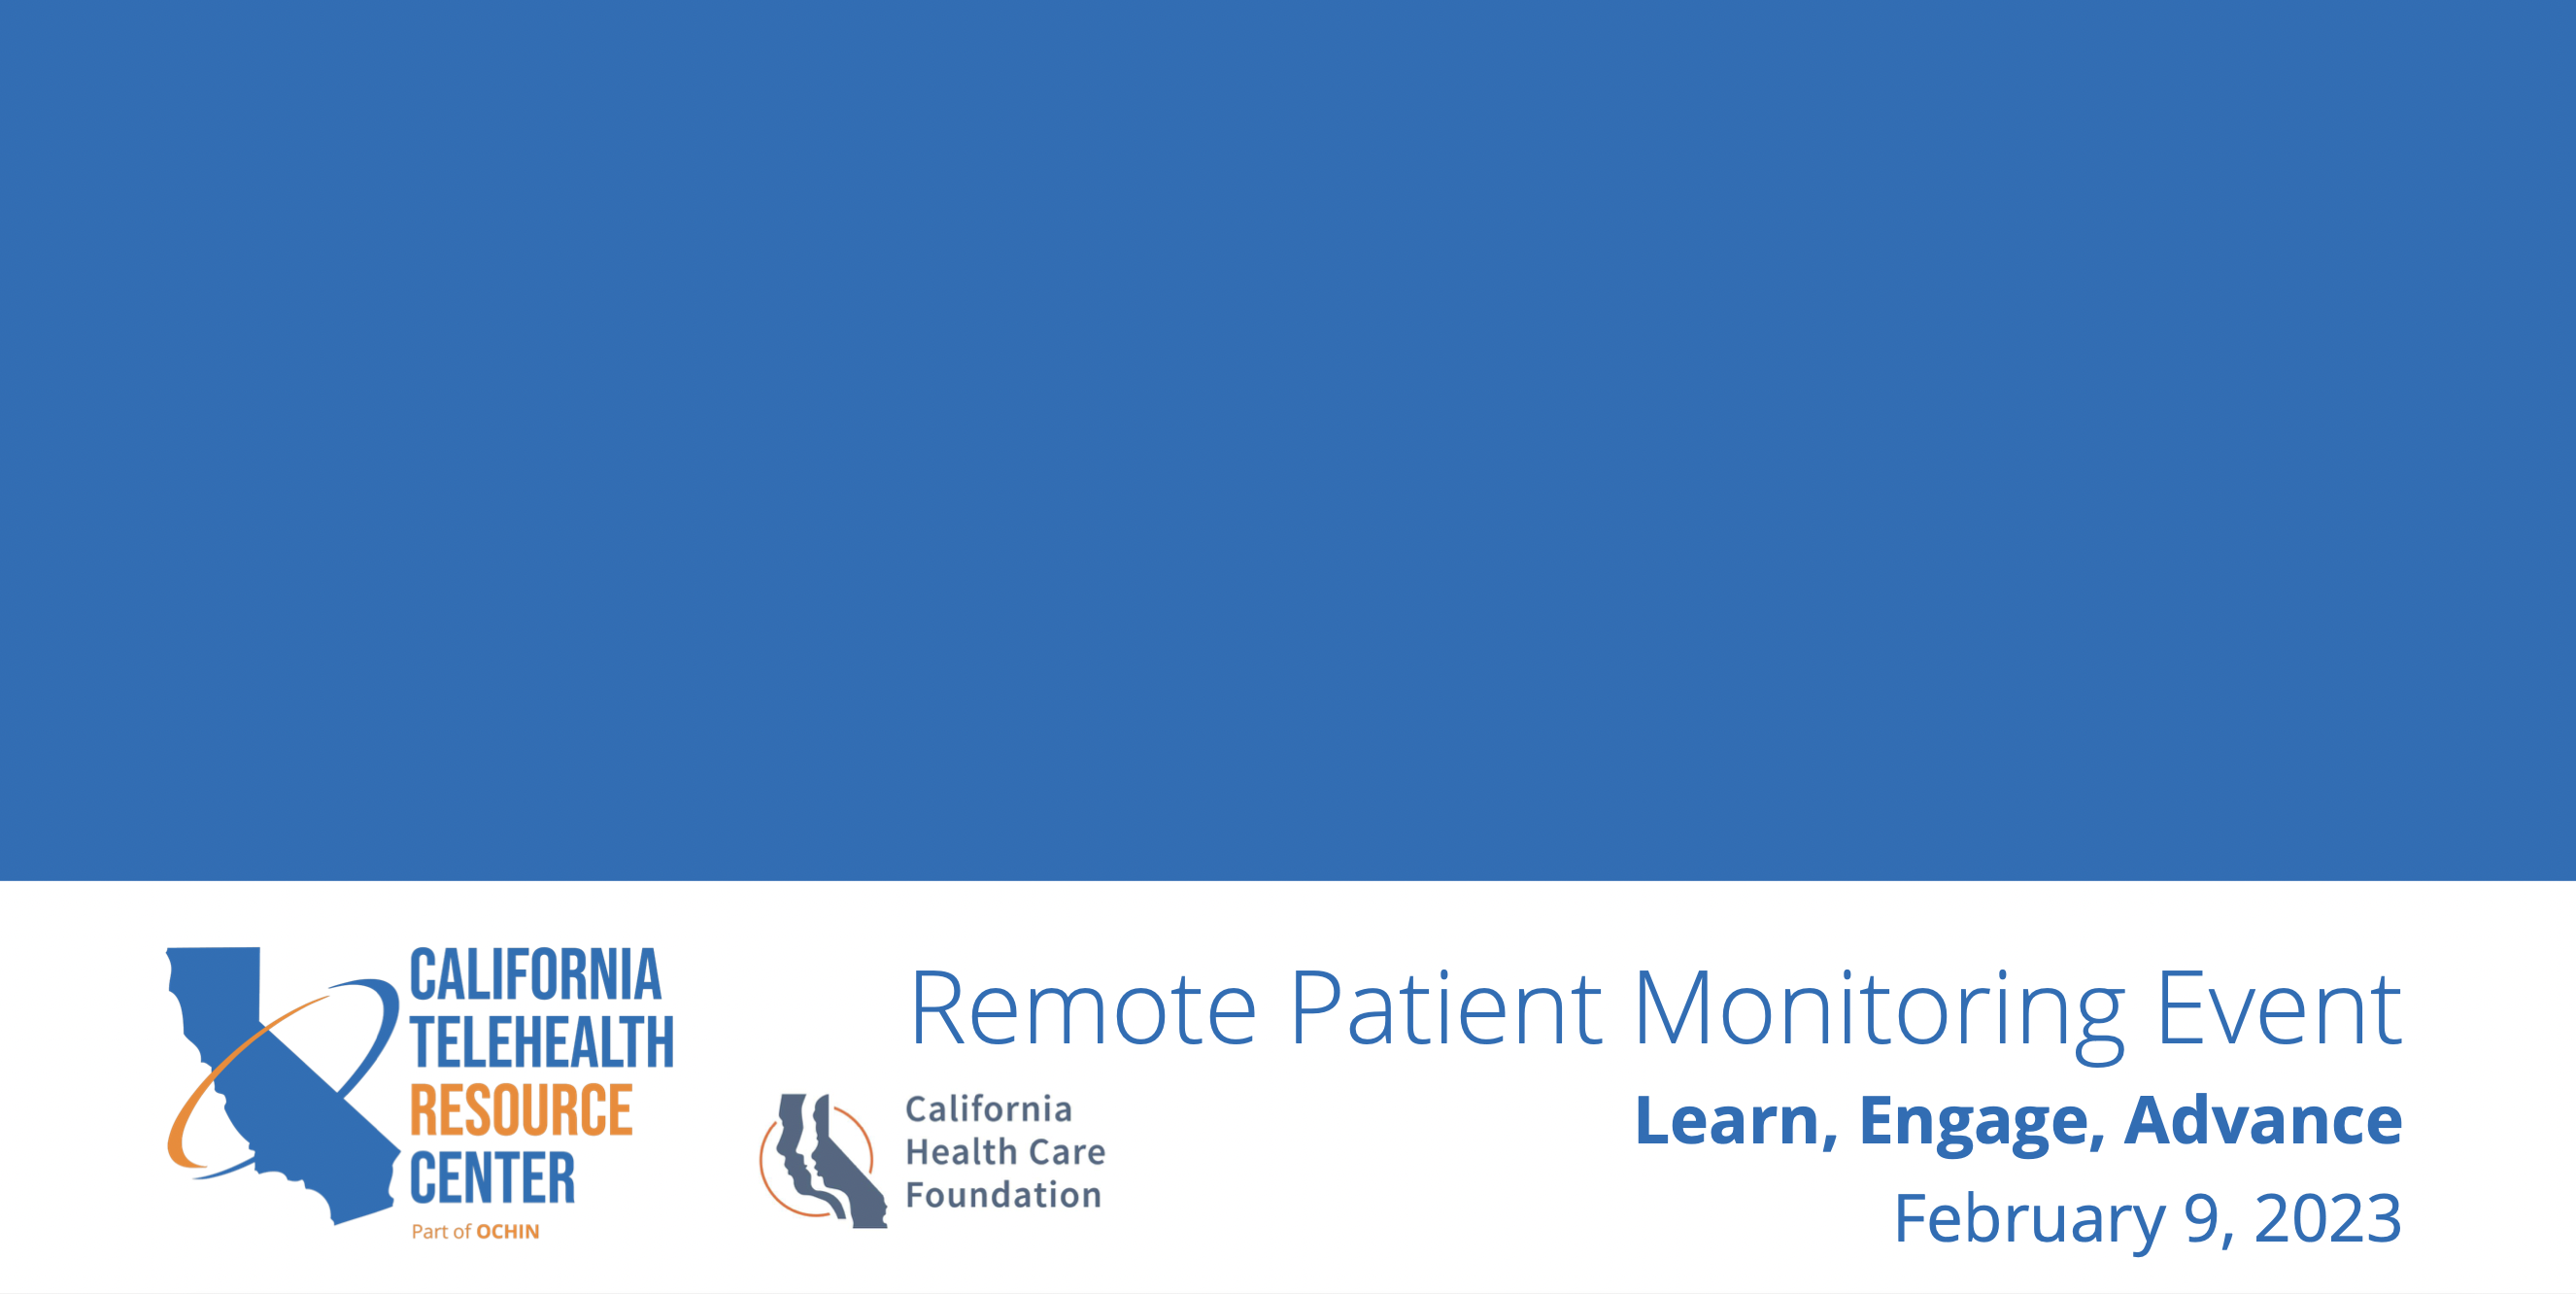 Remote Patient Monitoring event image with title text